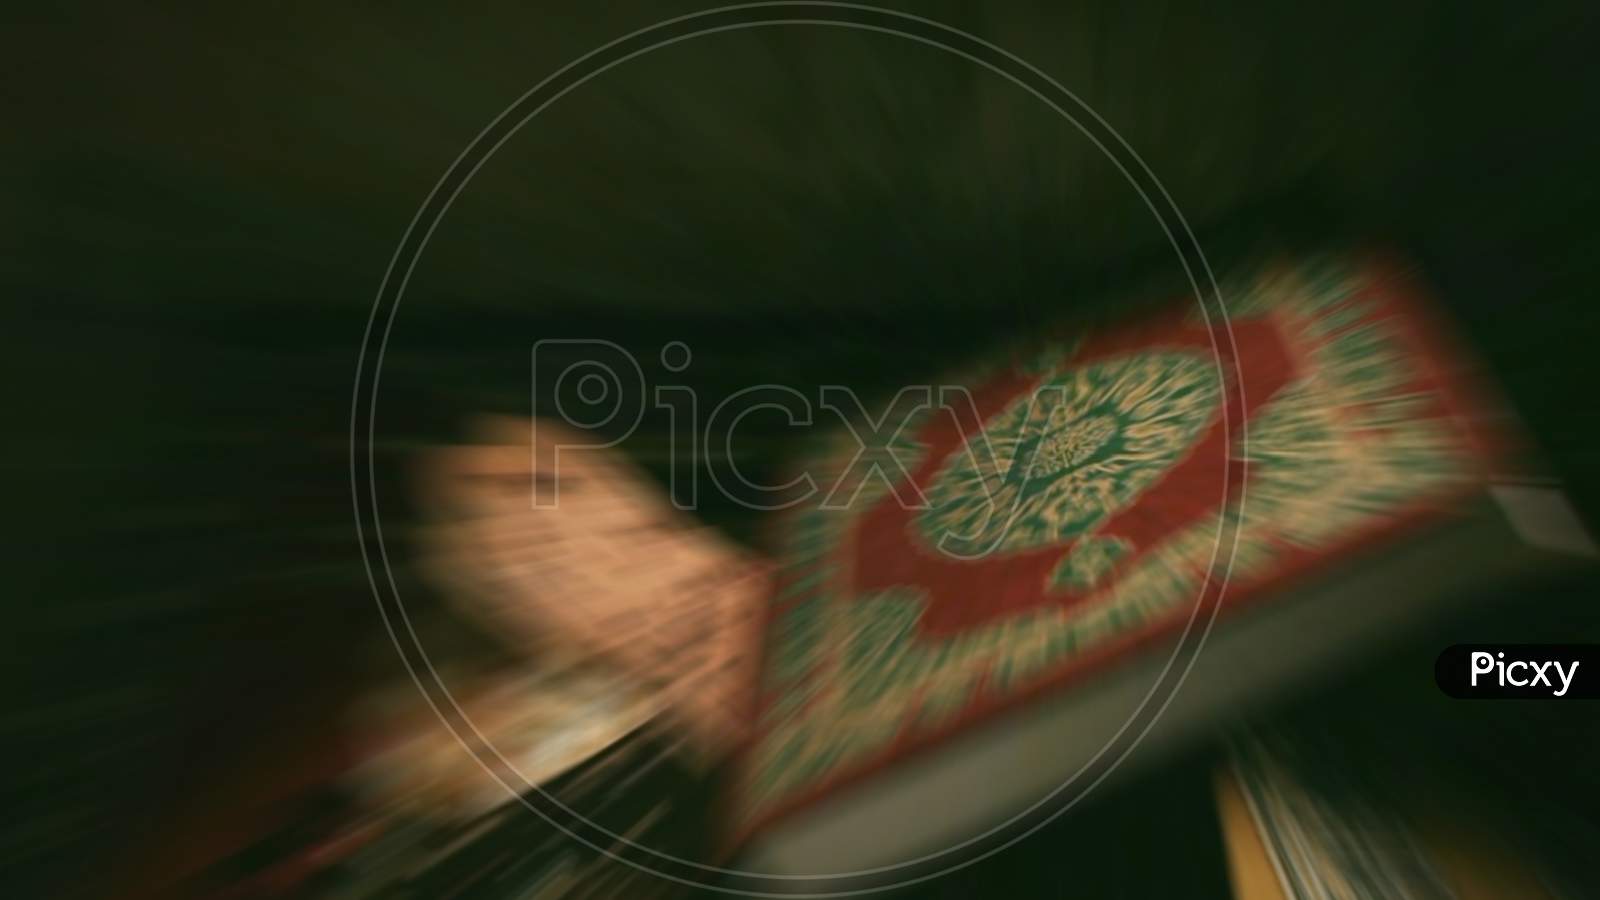 Blurred Shot Of Quran Book Cover With Arabic Calligraphy That Means Al-Quran, The Holy Quran.Ramadhan Kareem/Eid Fitr Concept.